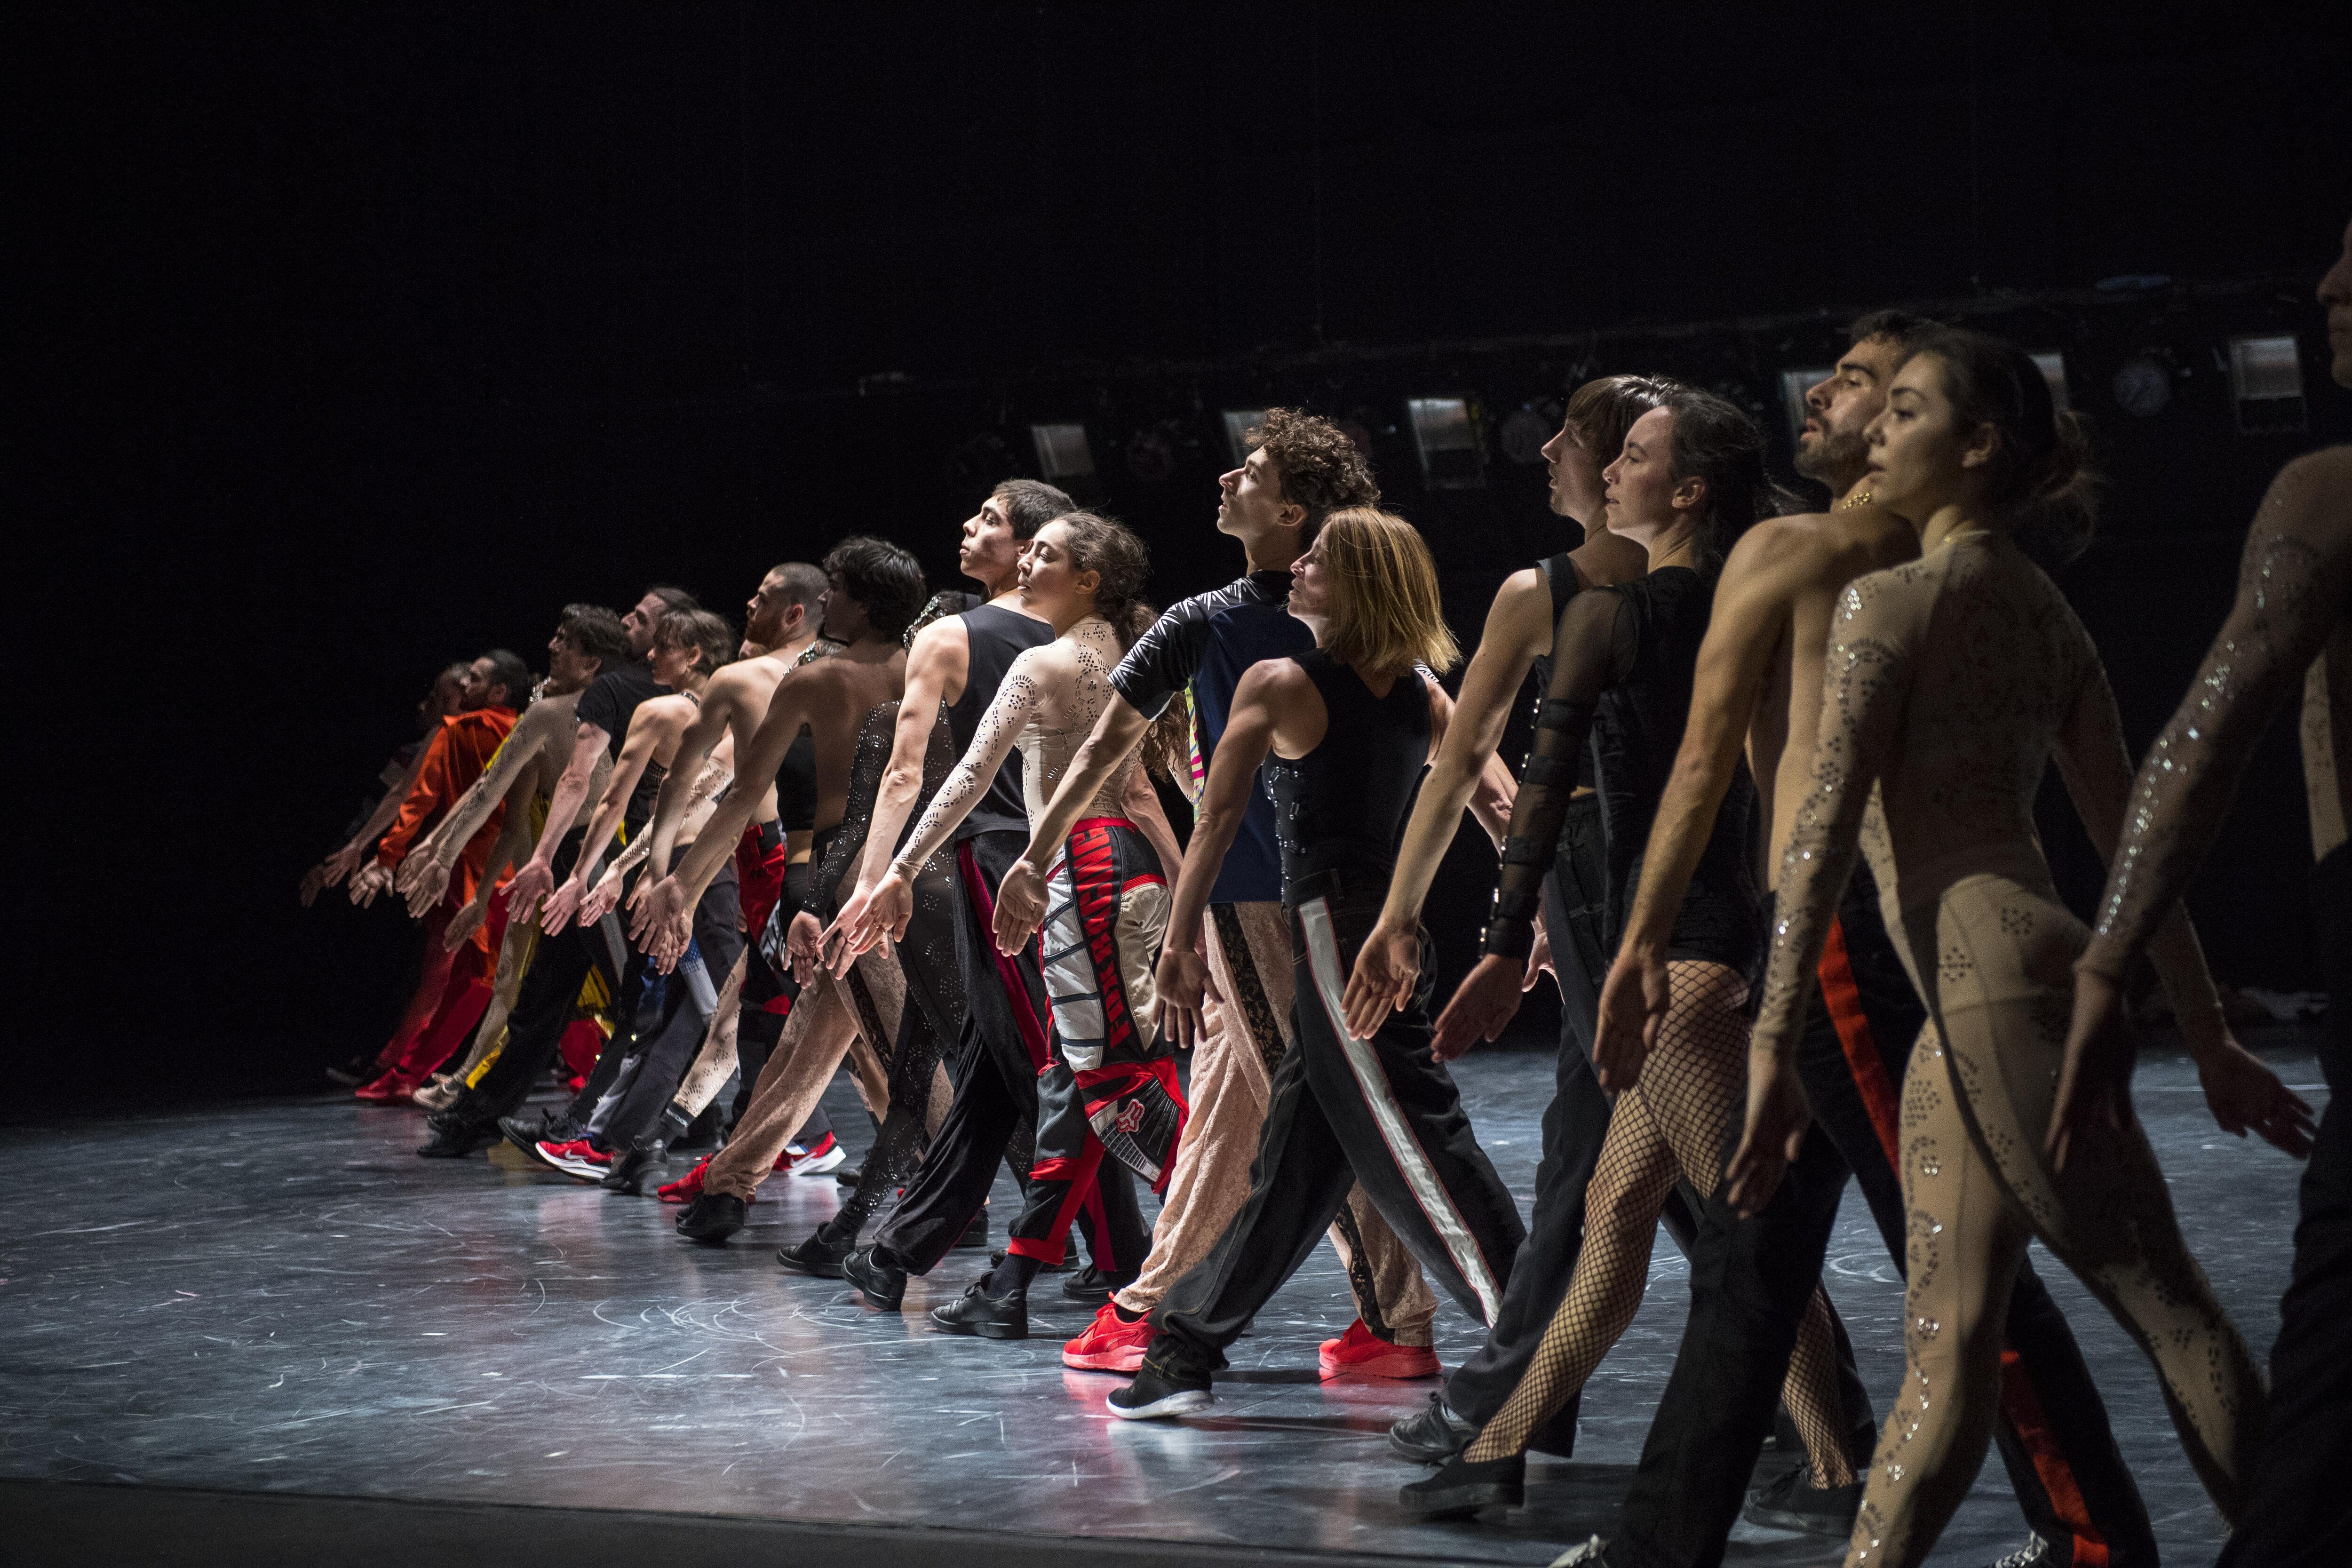 Dancers standing in a line with one leg forward, in Static Shot by Maud le Pladec